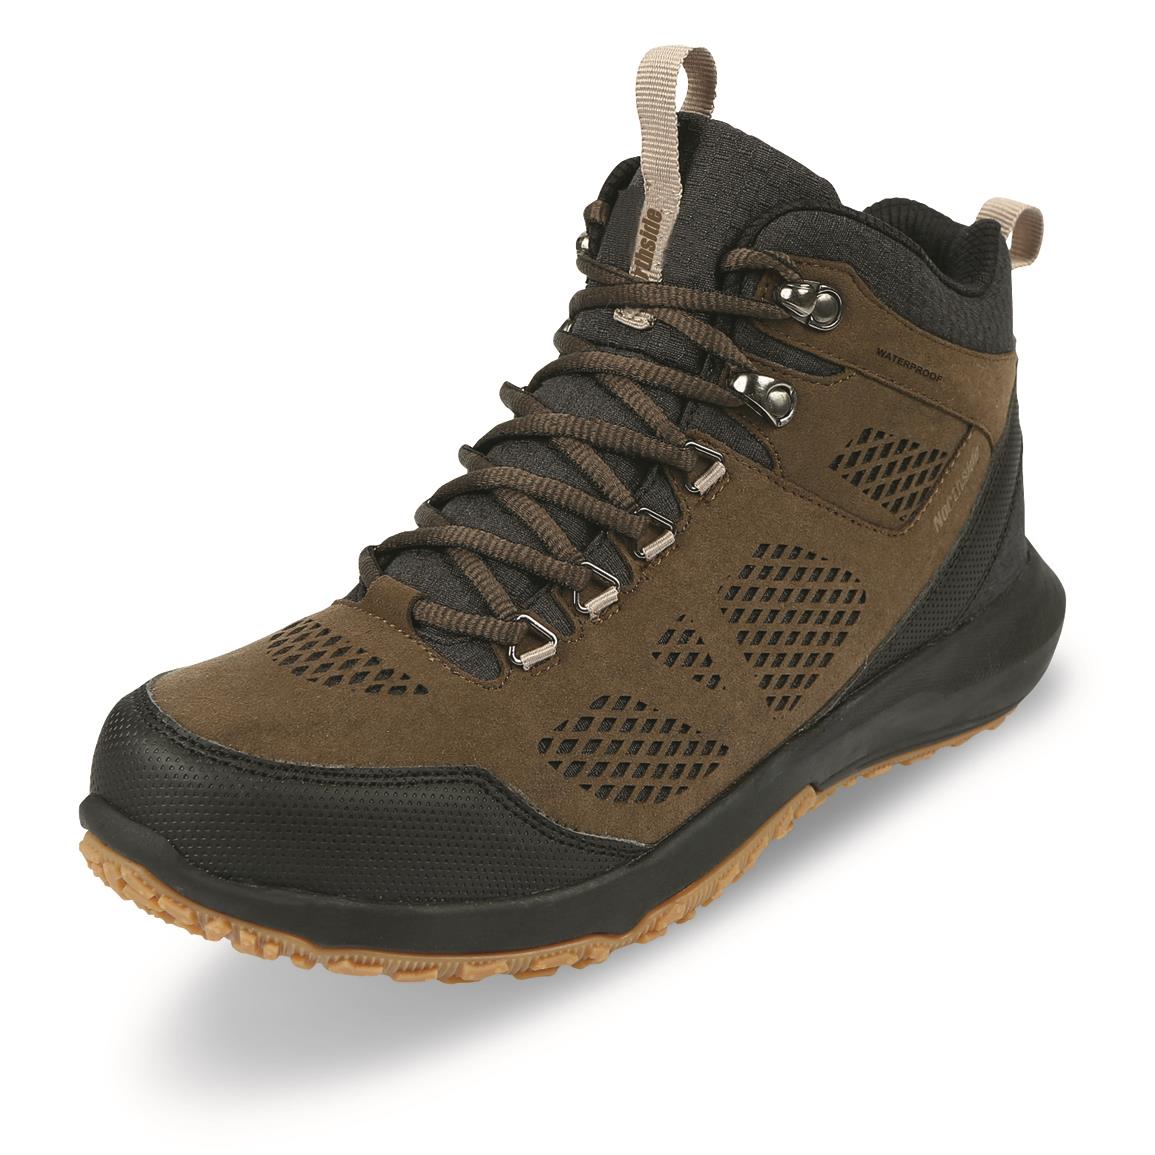 KEEN Men's Targhee Vent Mid Hiking Boots - 708346, Hiking Boots & Shoes